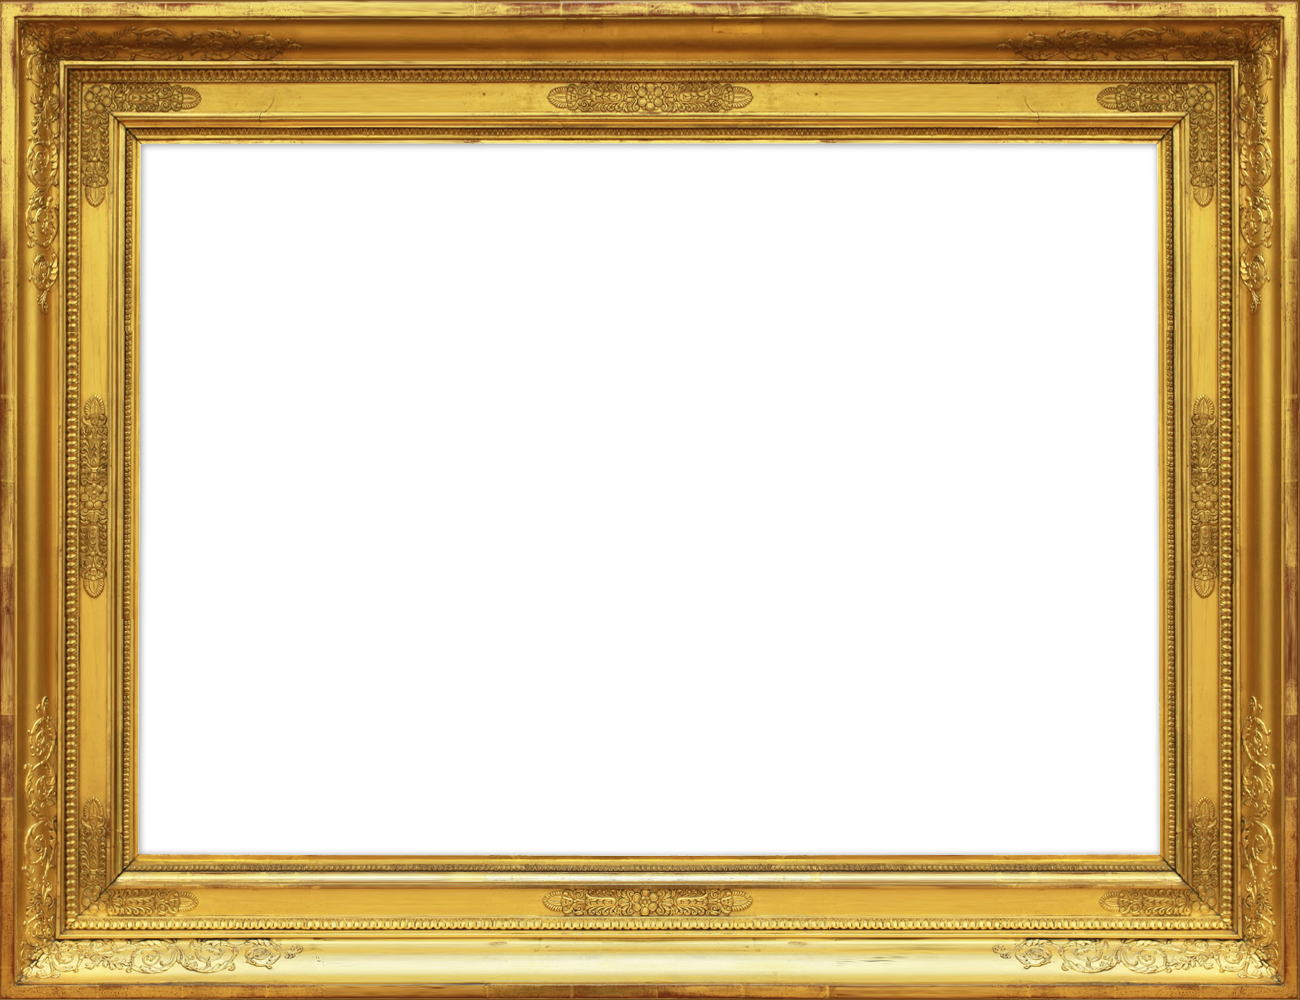 Photo Frame Png : PNG Photo Frame Gold #28920 - Free Icons and PNG